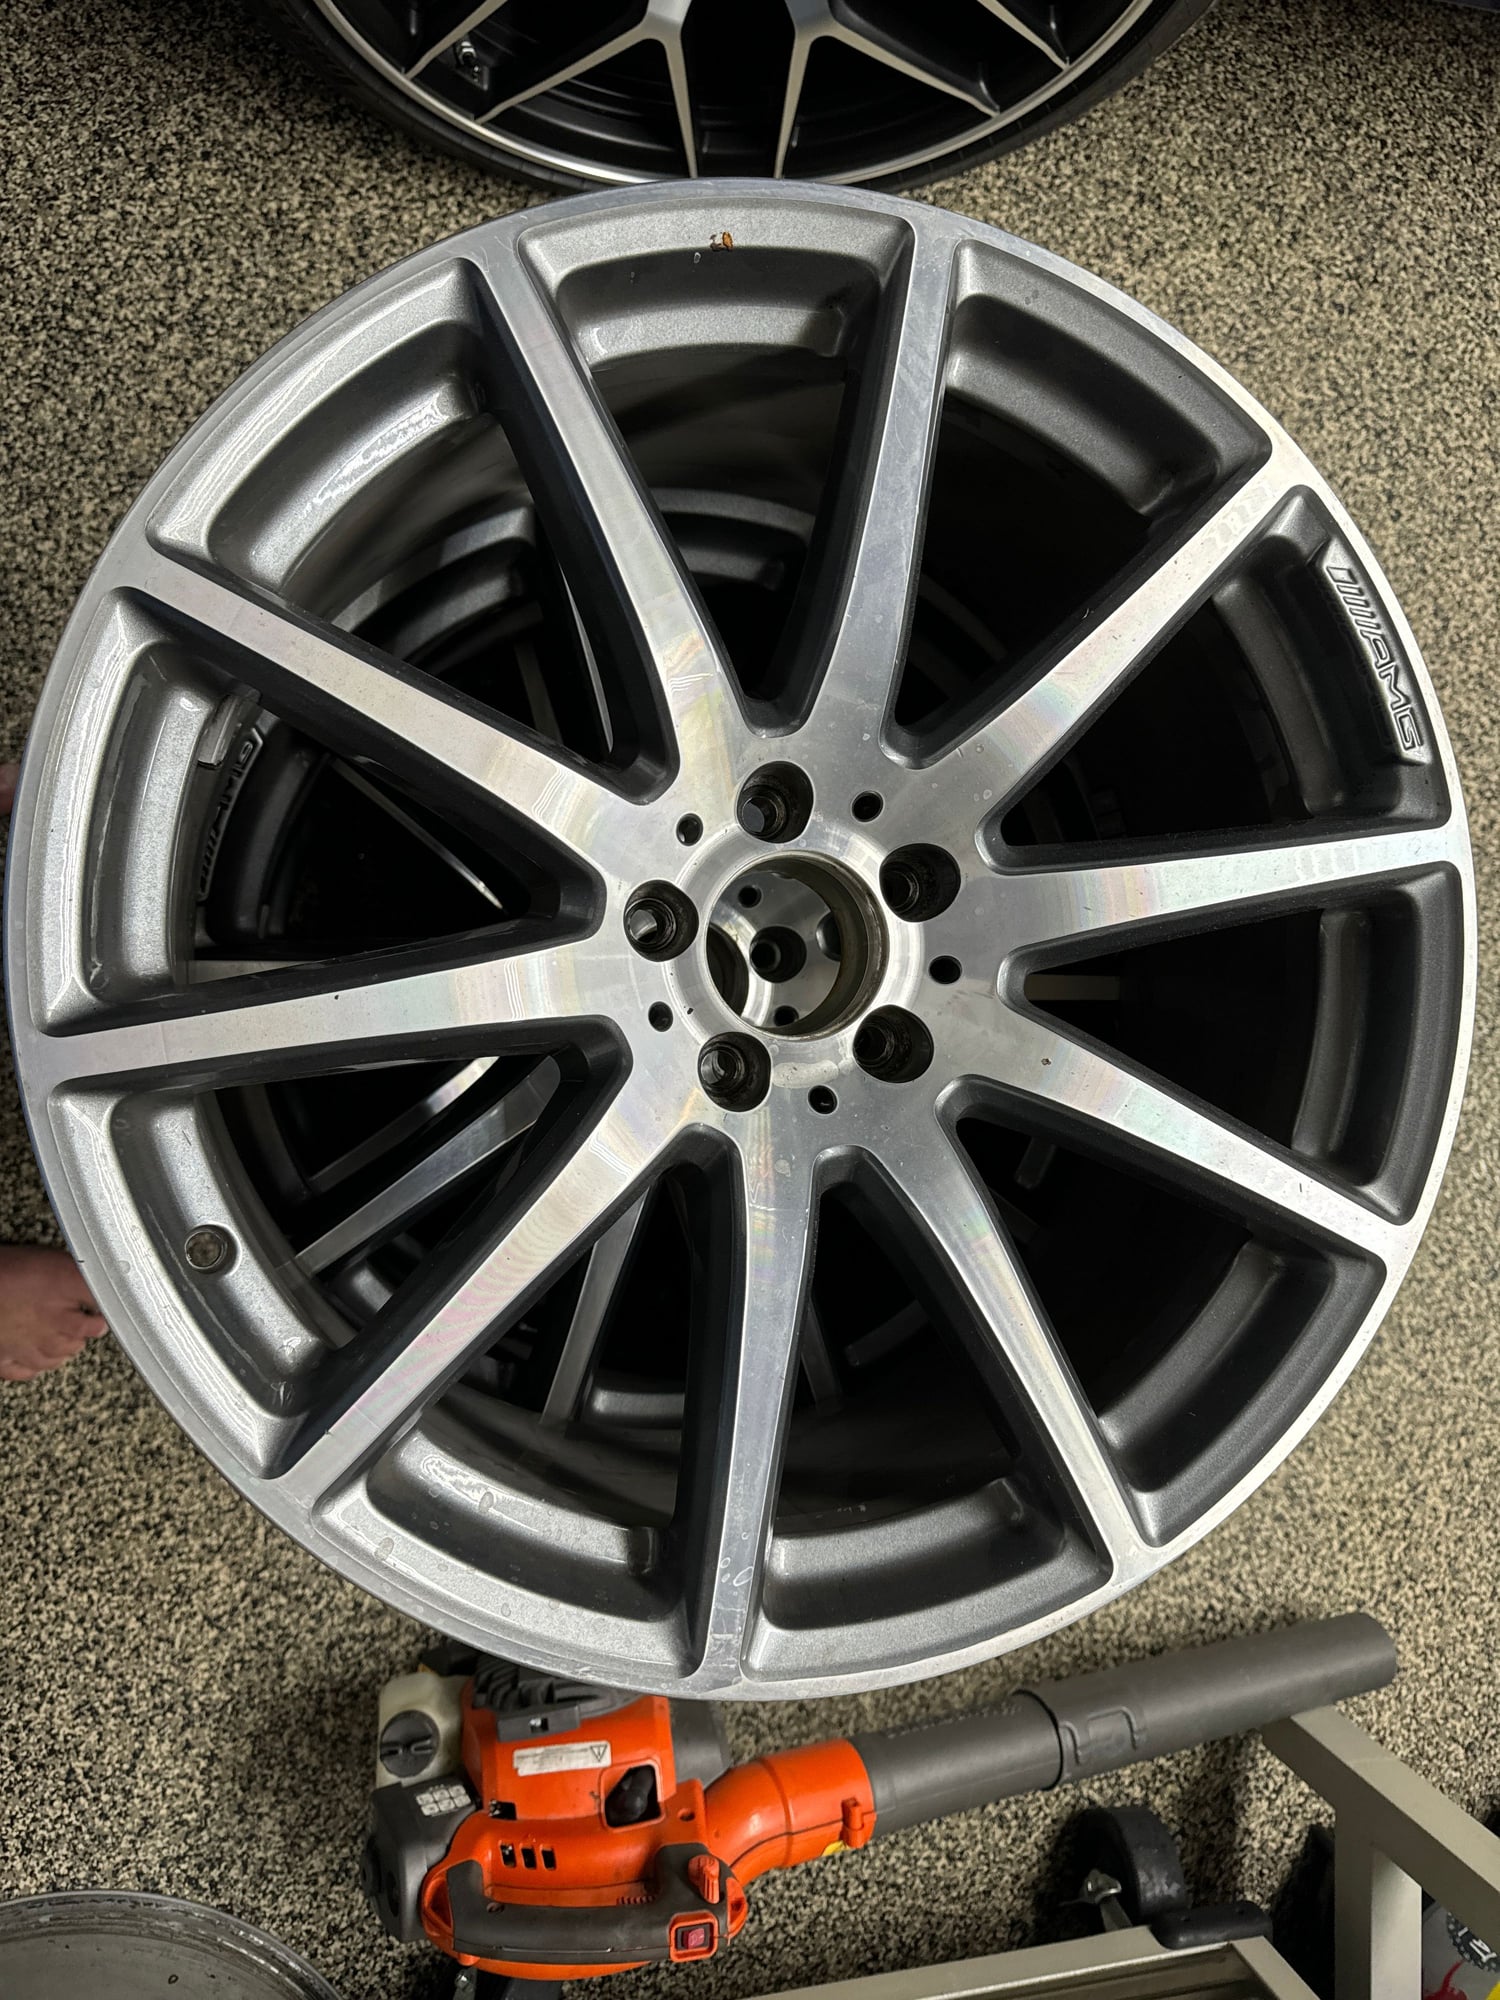 Wheels and Tires/Axles - 20" AMG Wheels - GLE W166 - Used - 2016 to 2019 Mercedes-Benz GLE63 AMG S - St. Petersburg, FL 33707, United States